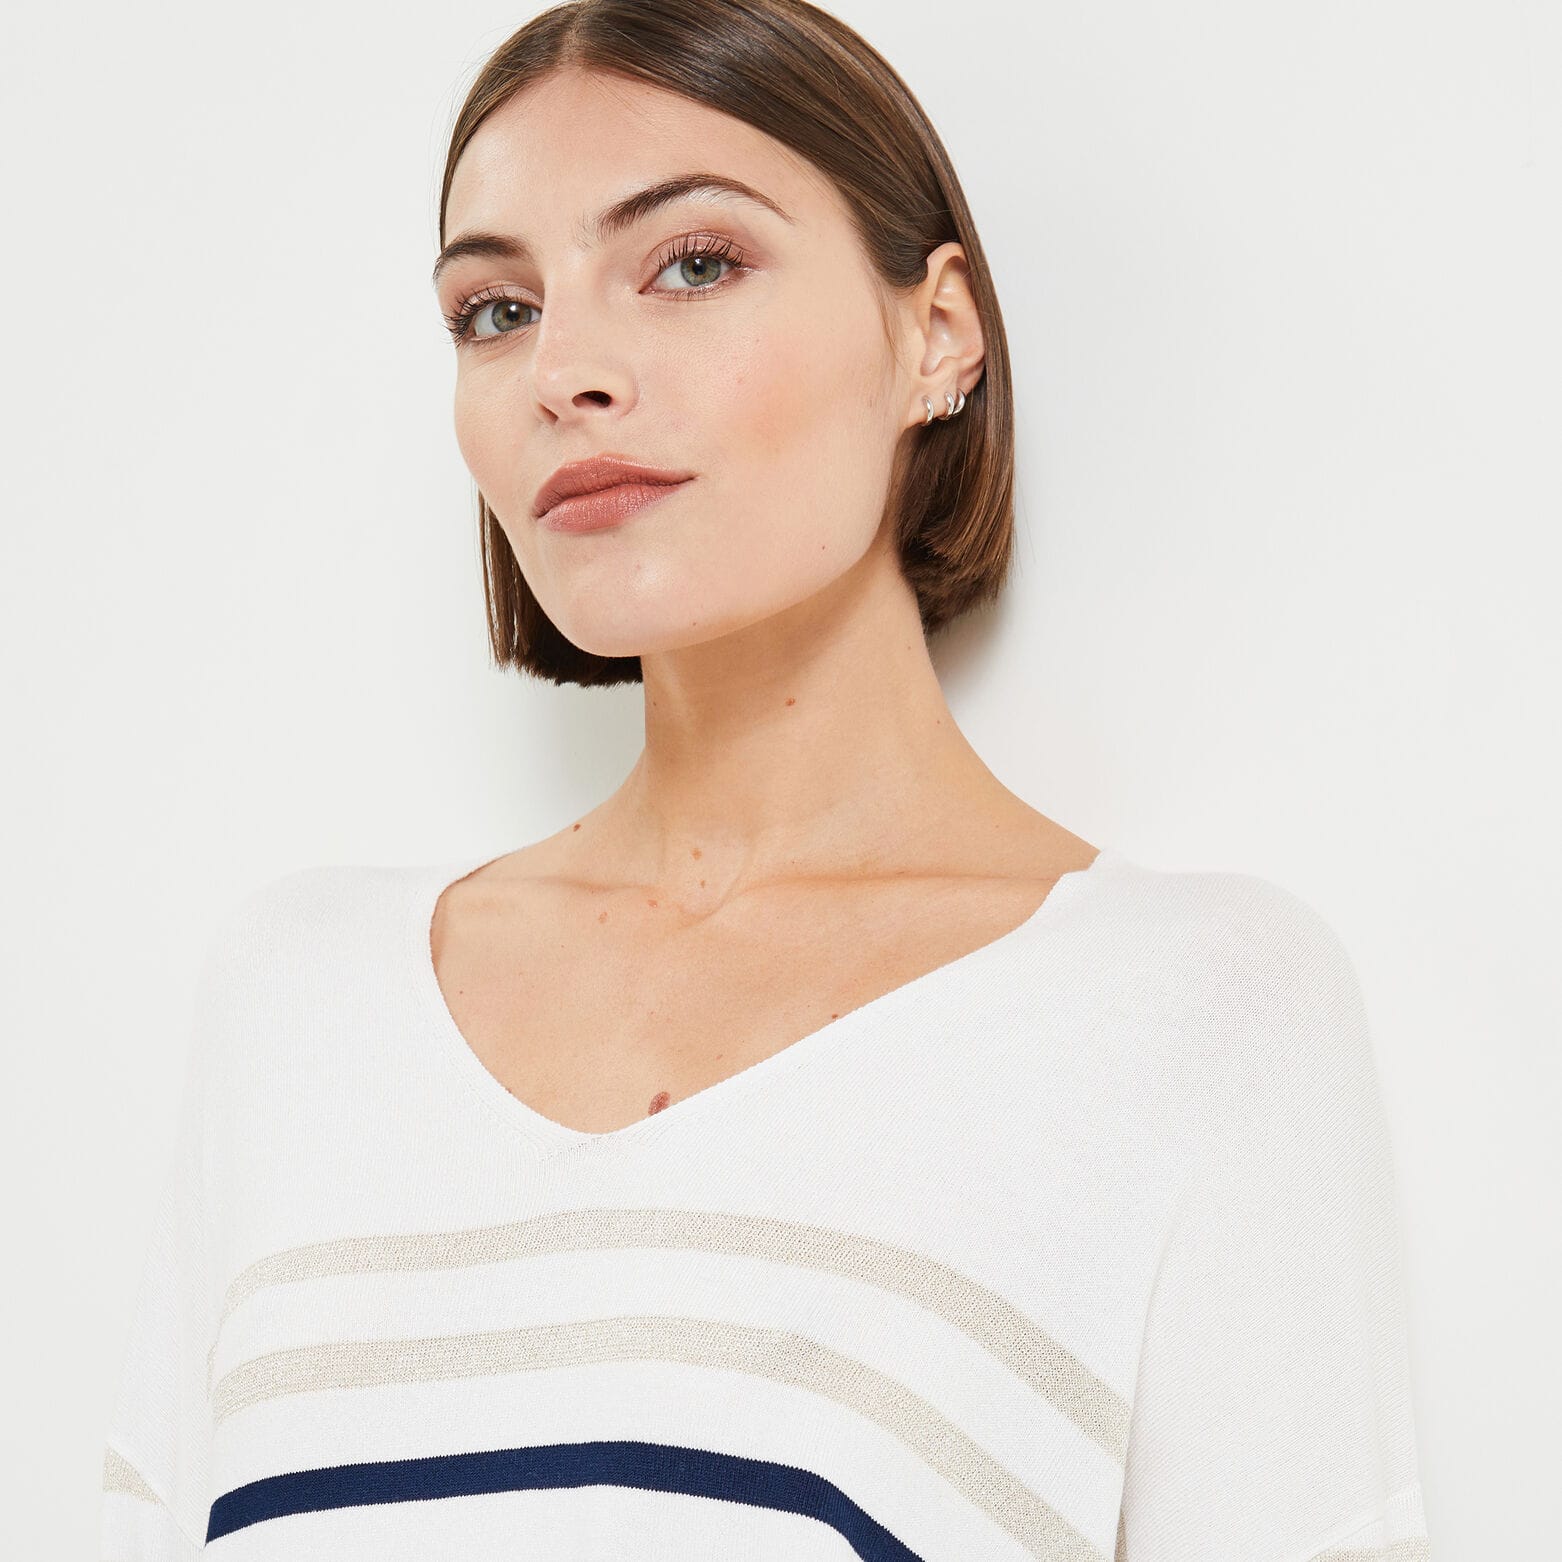 Pull marinère femme